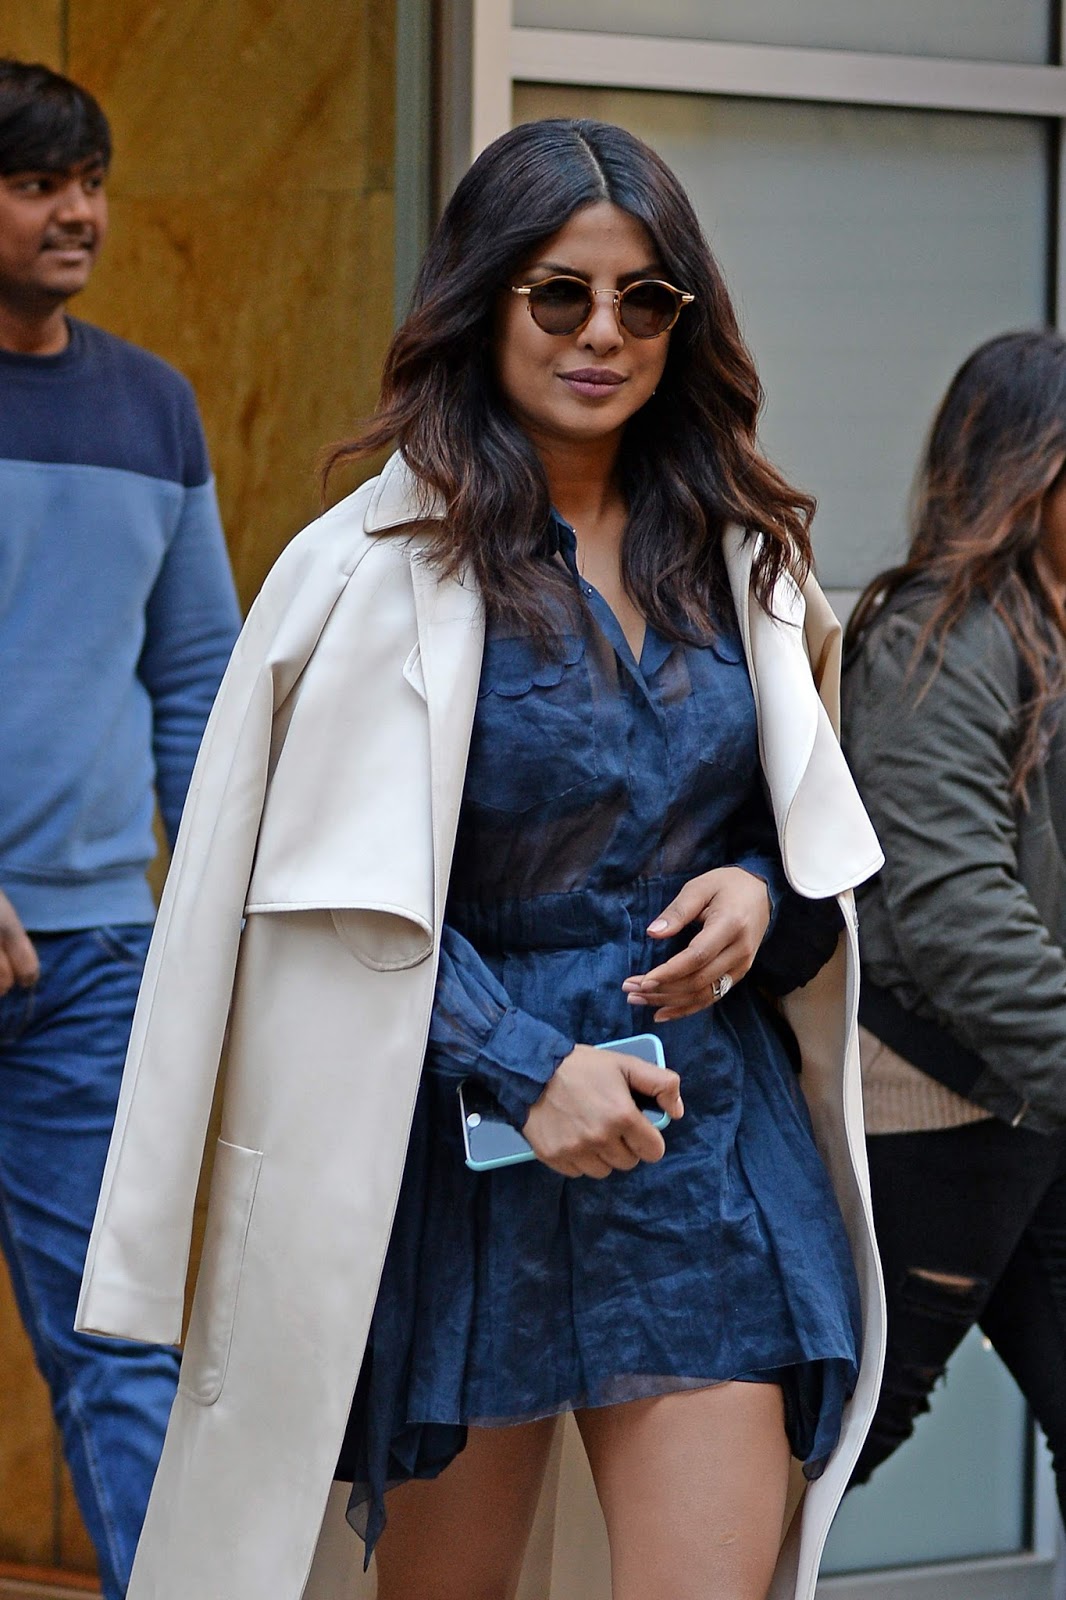 Priyanka Chopra Displays Her Toned Sexy Legs in a Blue Short Dress as She is Caught on Camera in New York City